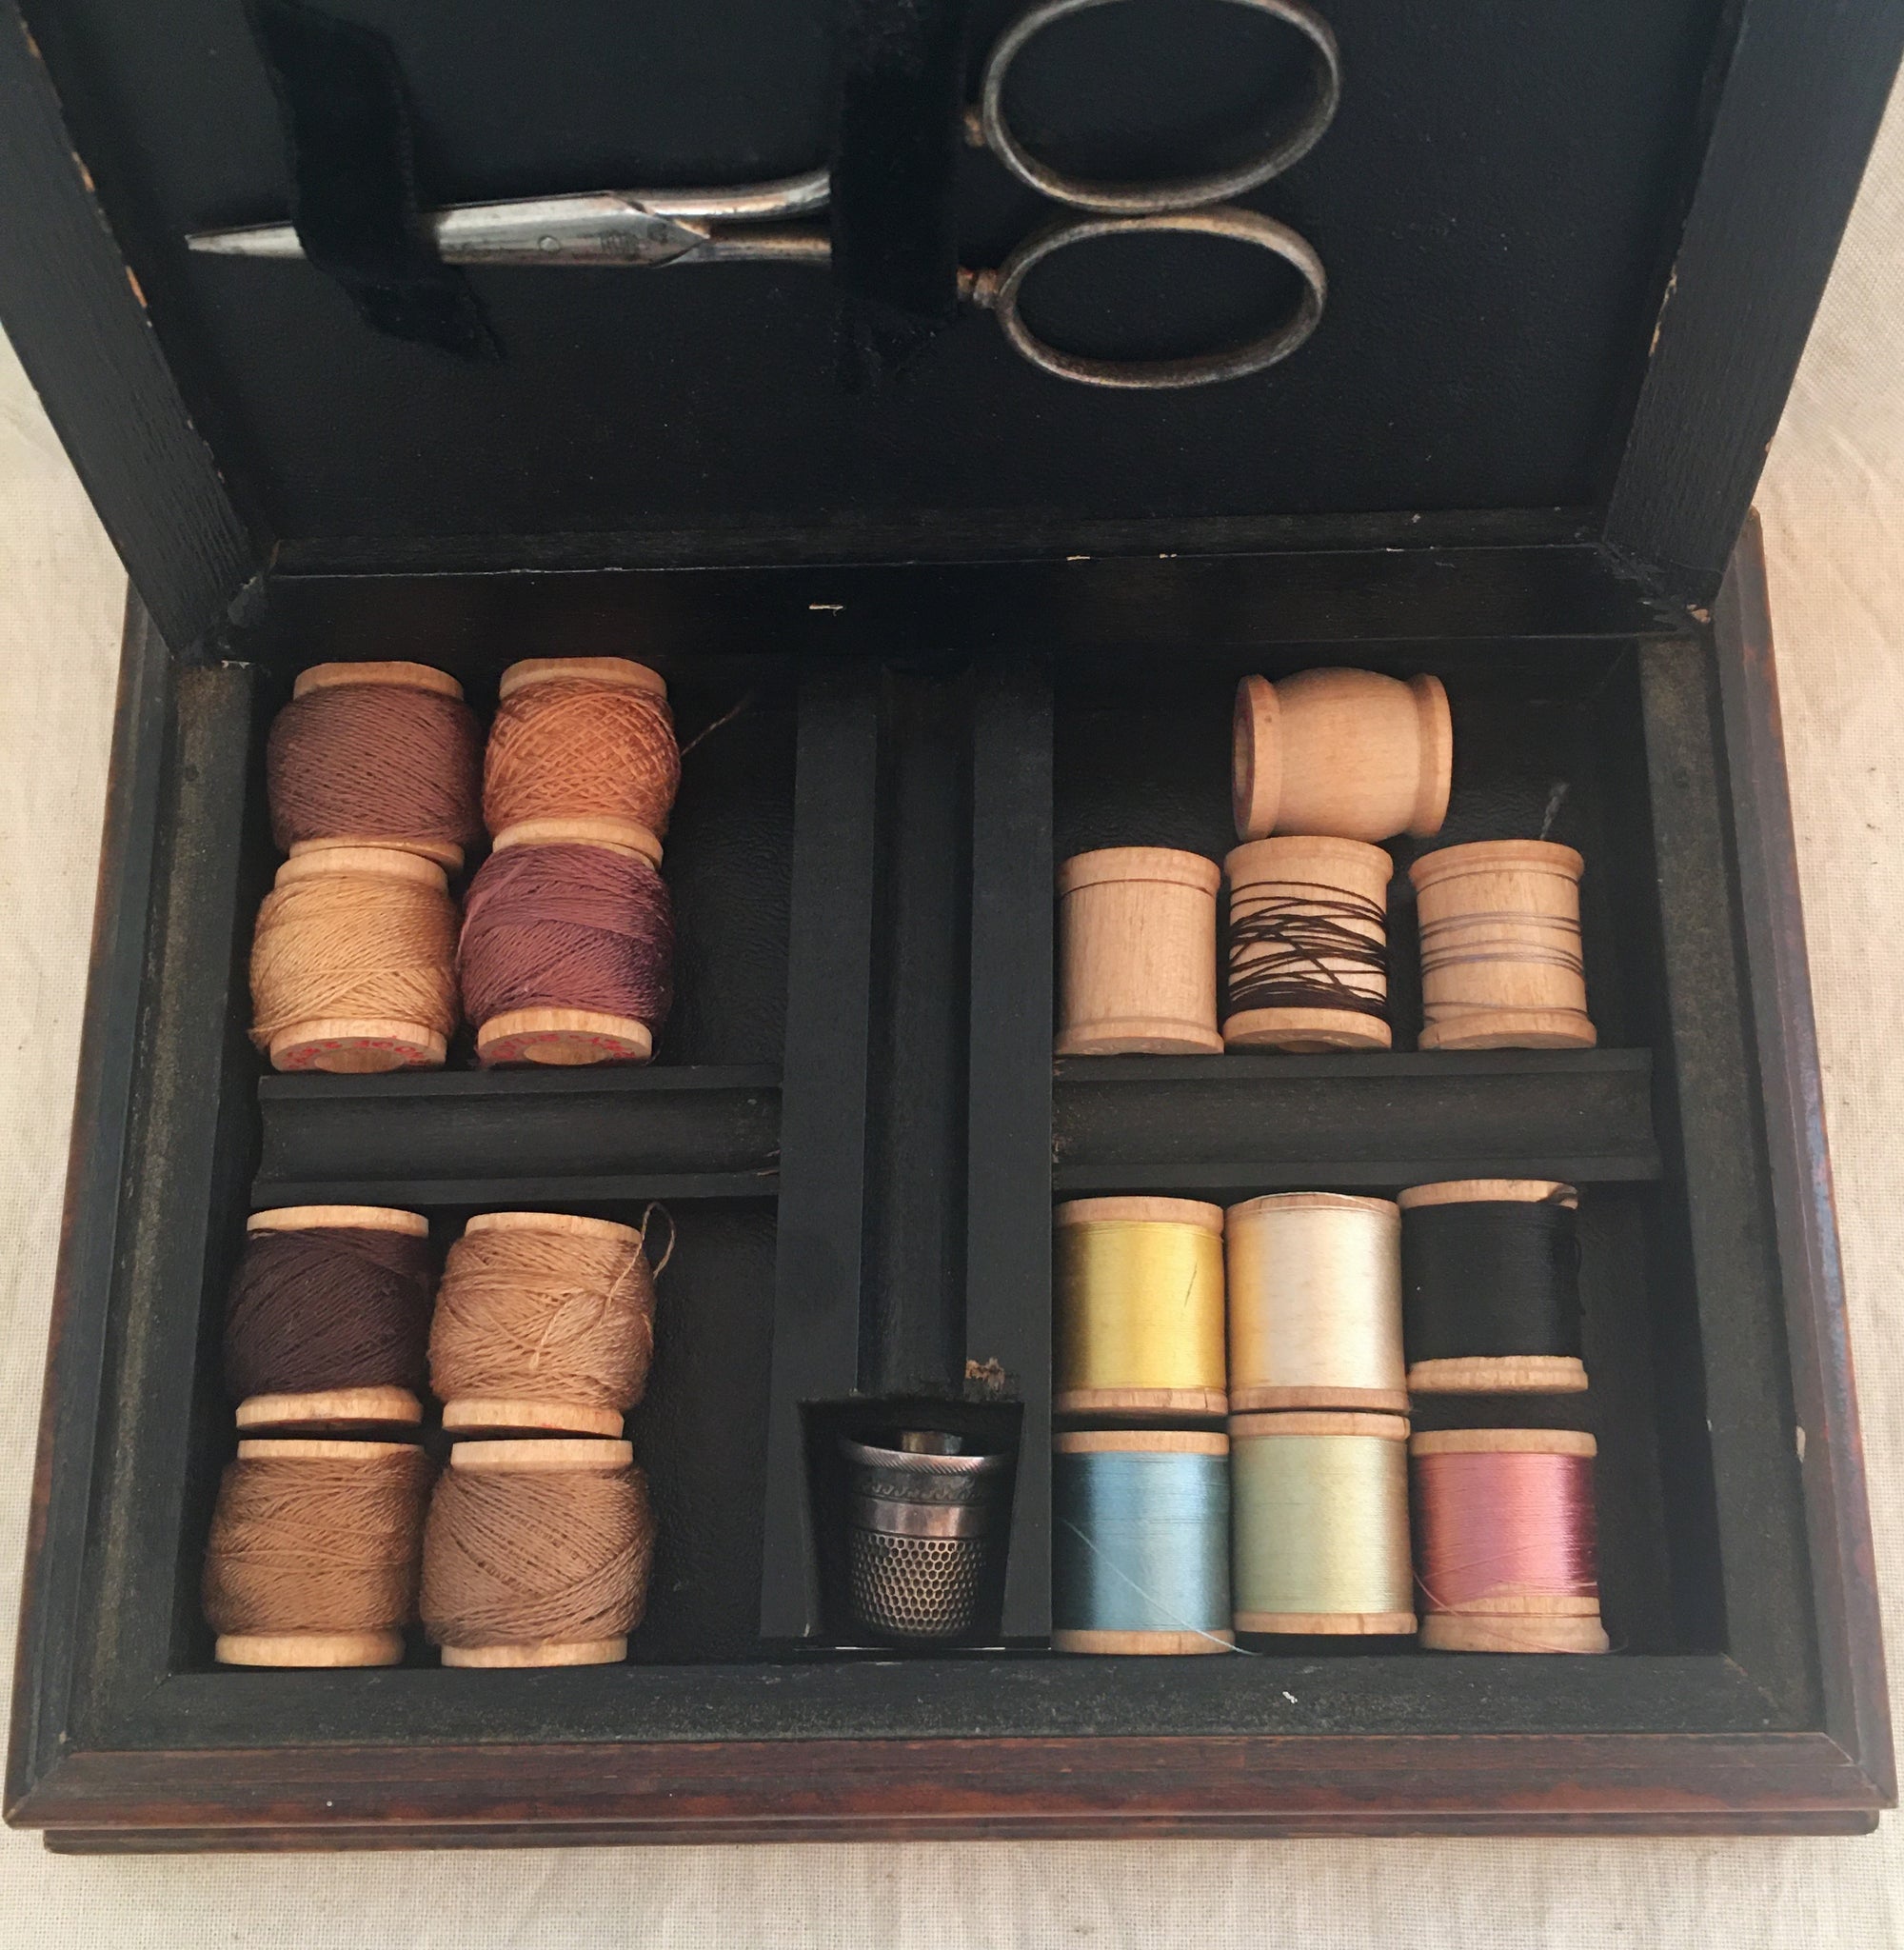 Antique Sewing Box with Contents